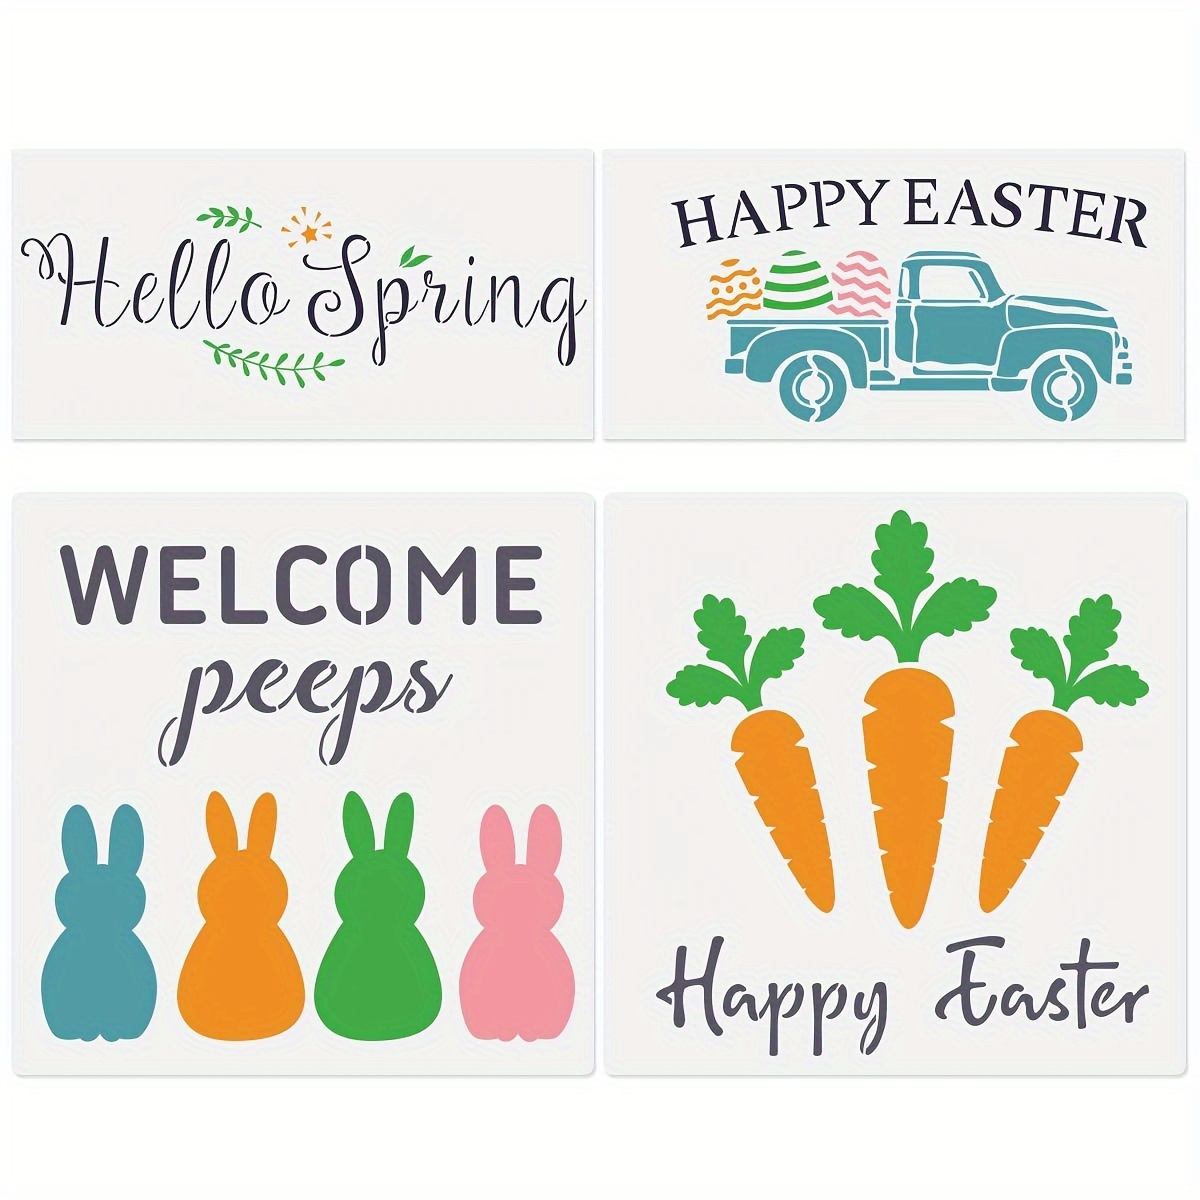  16 Pcs Easter Stencils for Painting 5 Inch, Easter Stencils  for Kids, Reusable Bunny Egg Carrot Stencils Templates for Easter  Decoration, Easter Party DIY Crafts Scrapbook Making (Easter) : Arts